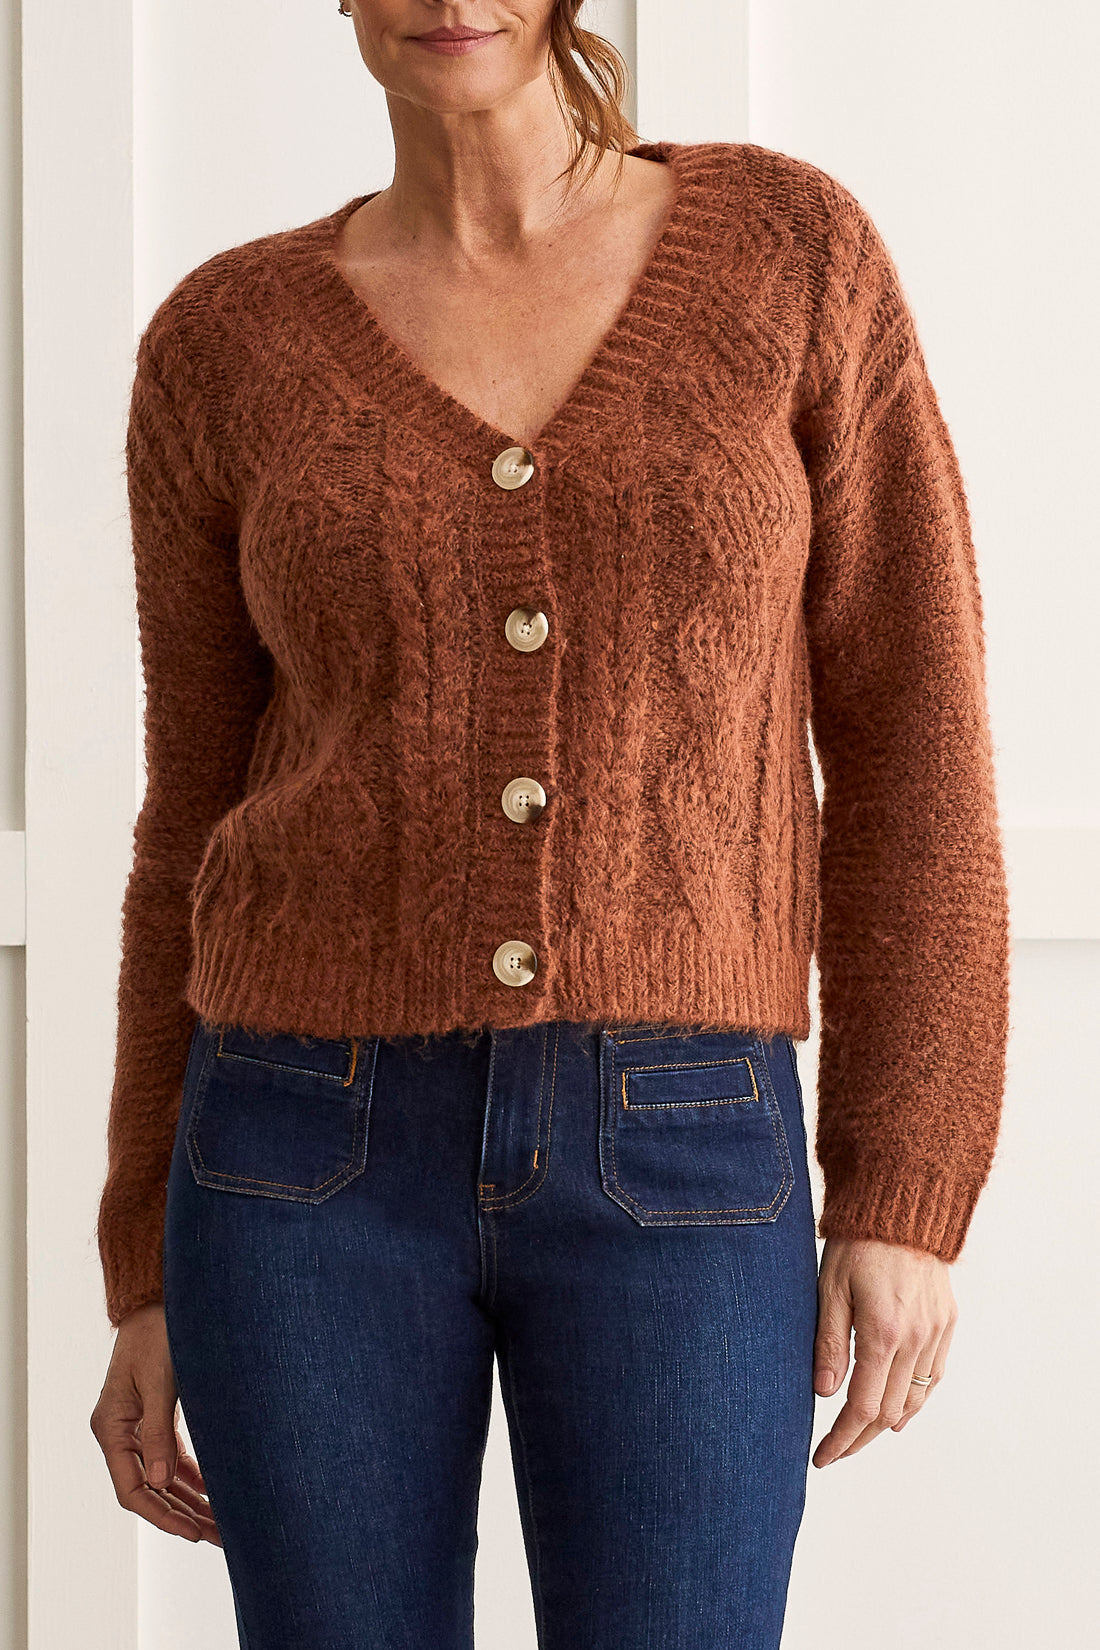 Sweater Cardigan with Faux Horn Buttons in Copper by Tribal